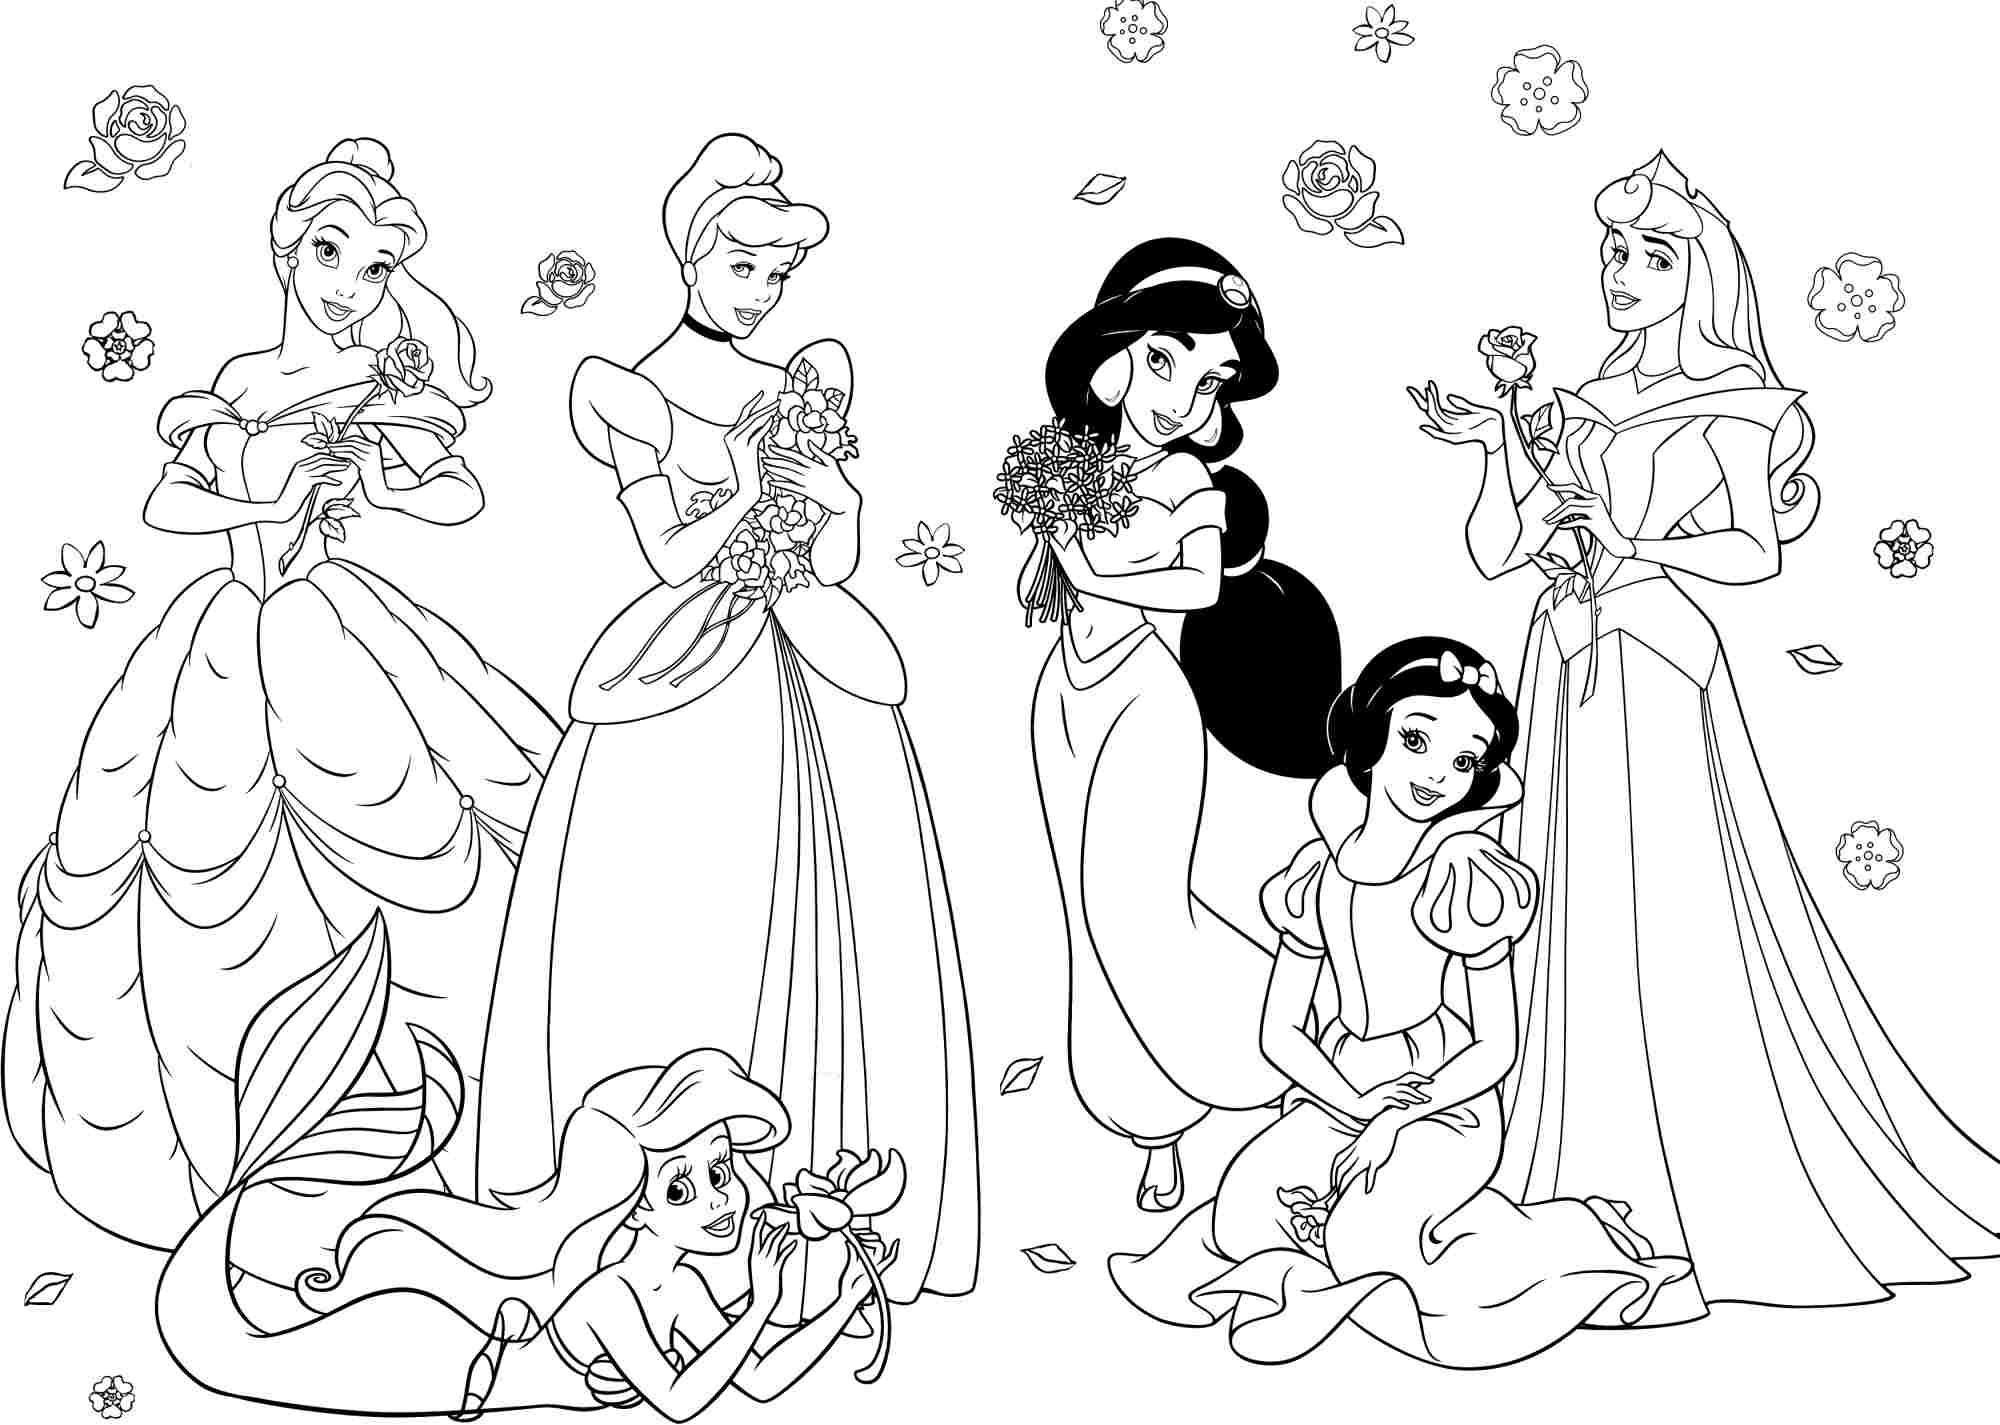 Happy Birthday Disney Coloring Pages - Coloring Home